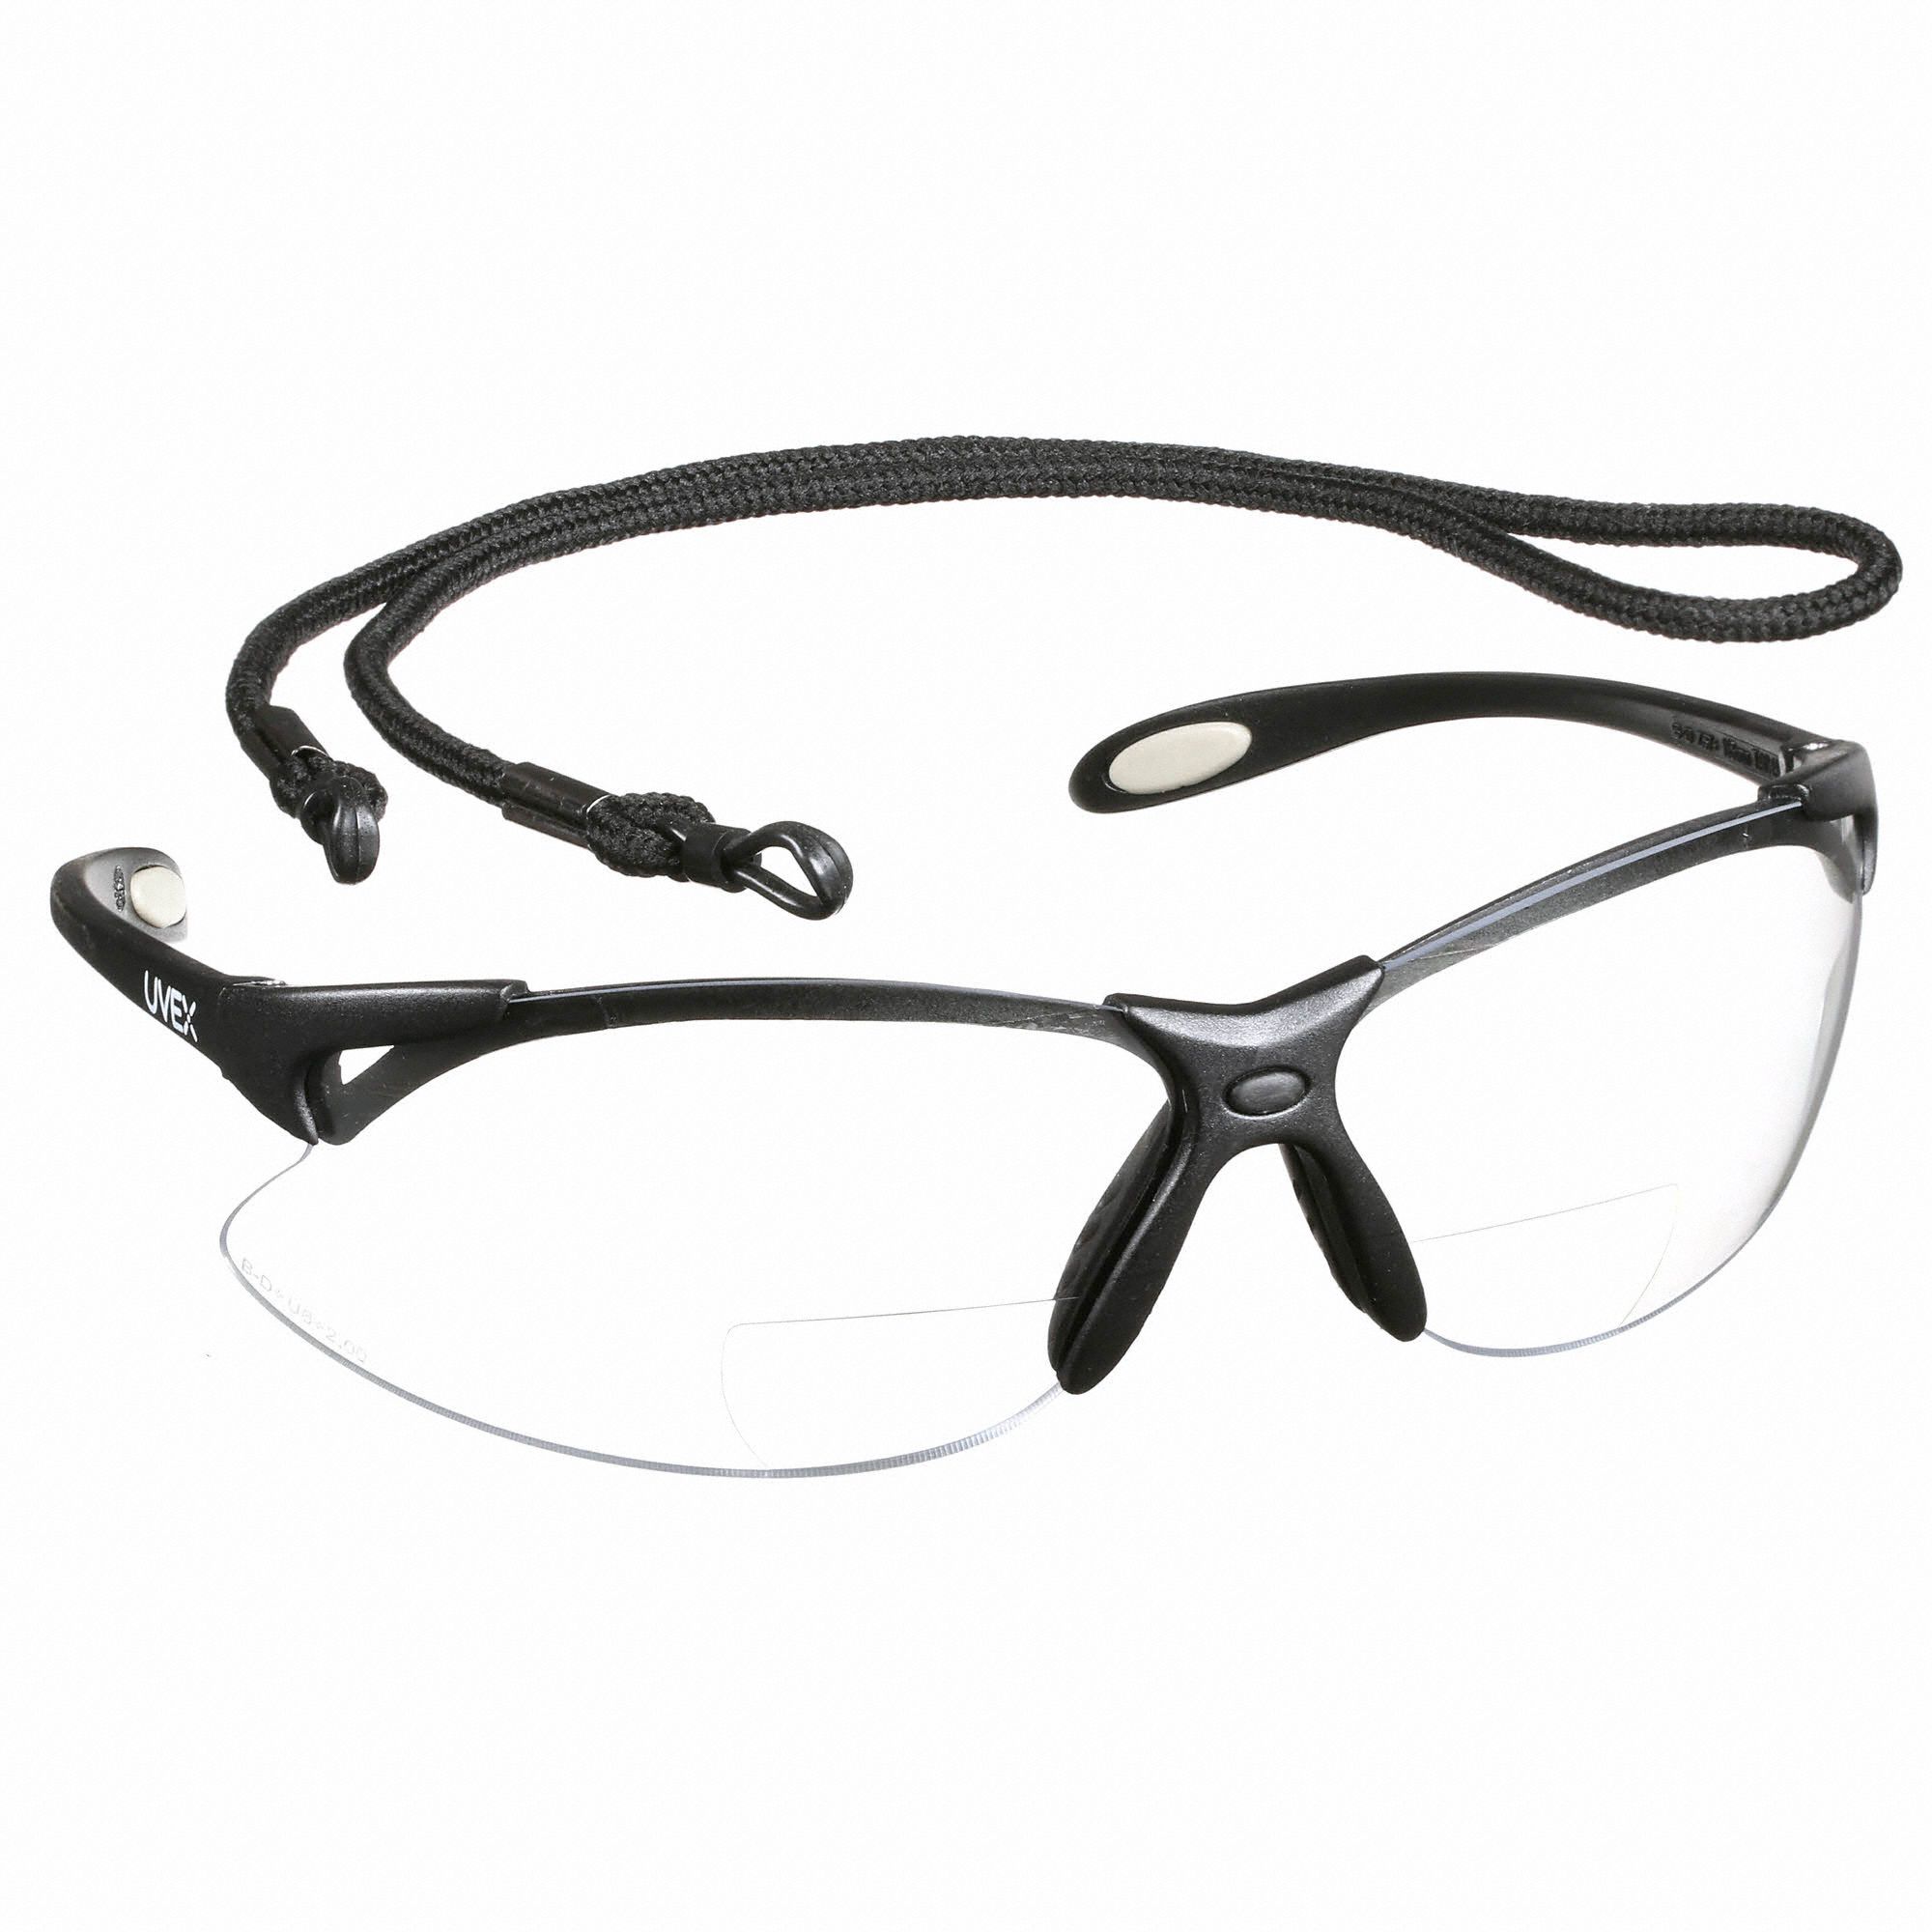 UVEX by Honeywell A961 Reader//Magnifier Series Black Frame 2.0 Diopter TSR Gray Lens with Anti-Scratch Hardcoat